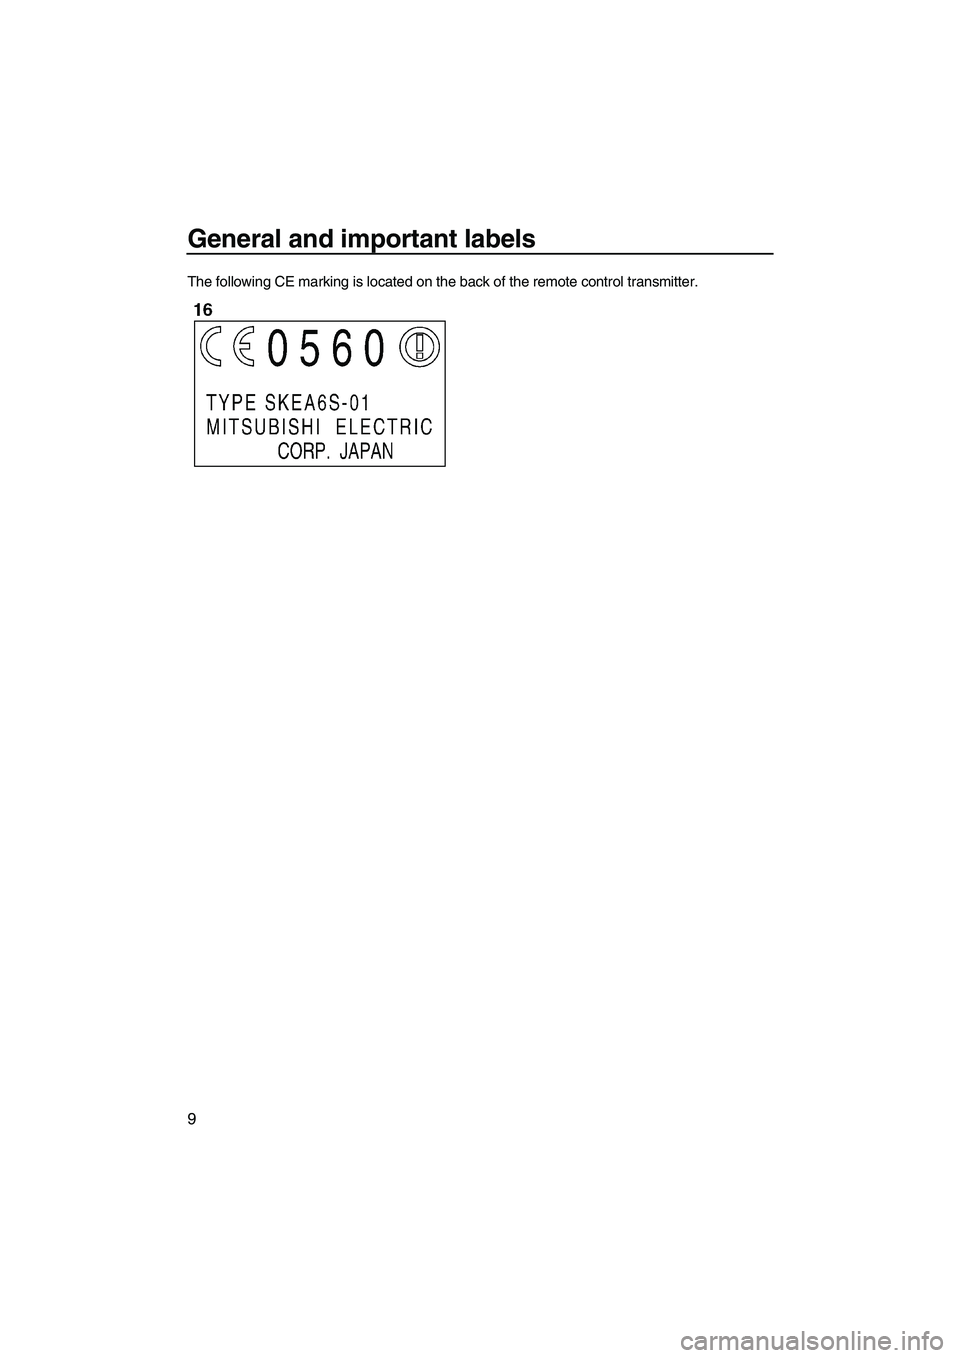 YAMAHA SVHO 2009 User Guide General and important labels
9
The following CE marking is located on the back of the remote control transmitter.
UF1W71E0.book  Page 9  Tuesday, June 24, 2008  11:46 AM 